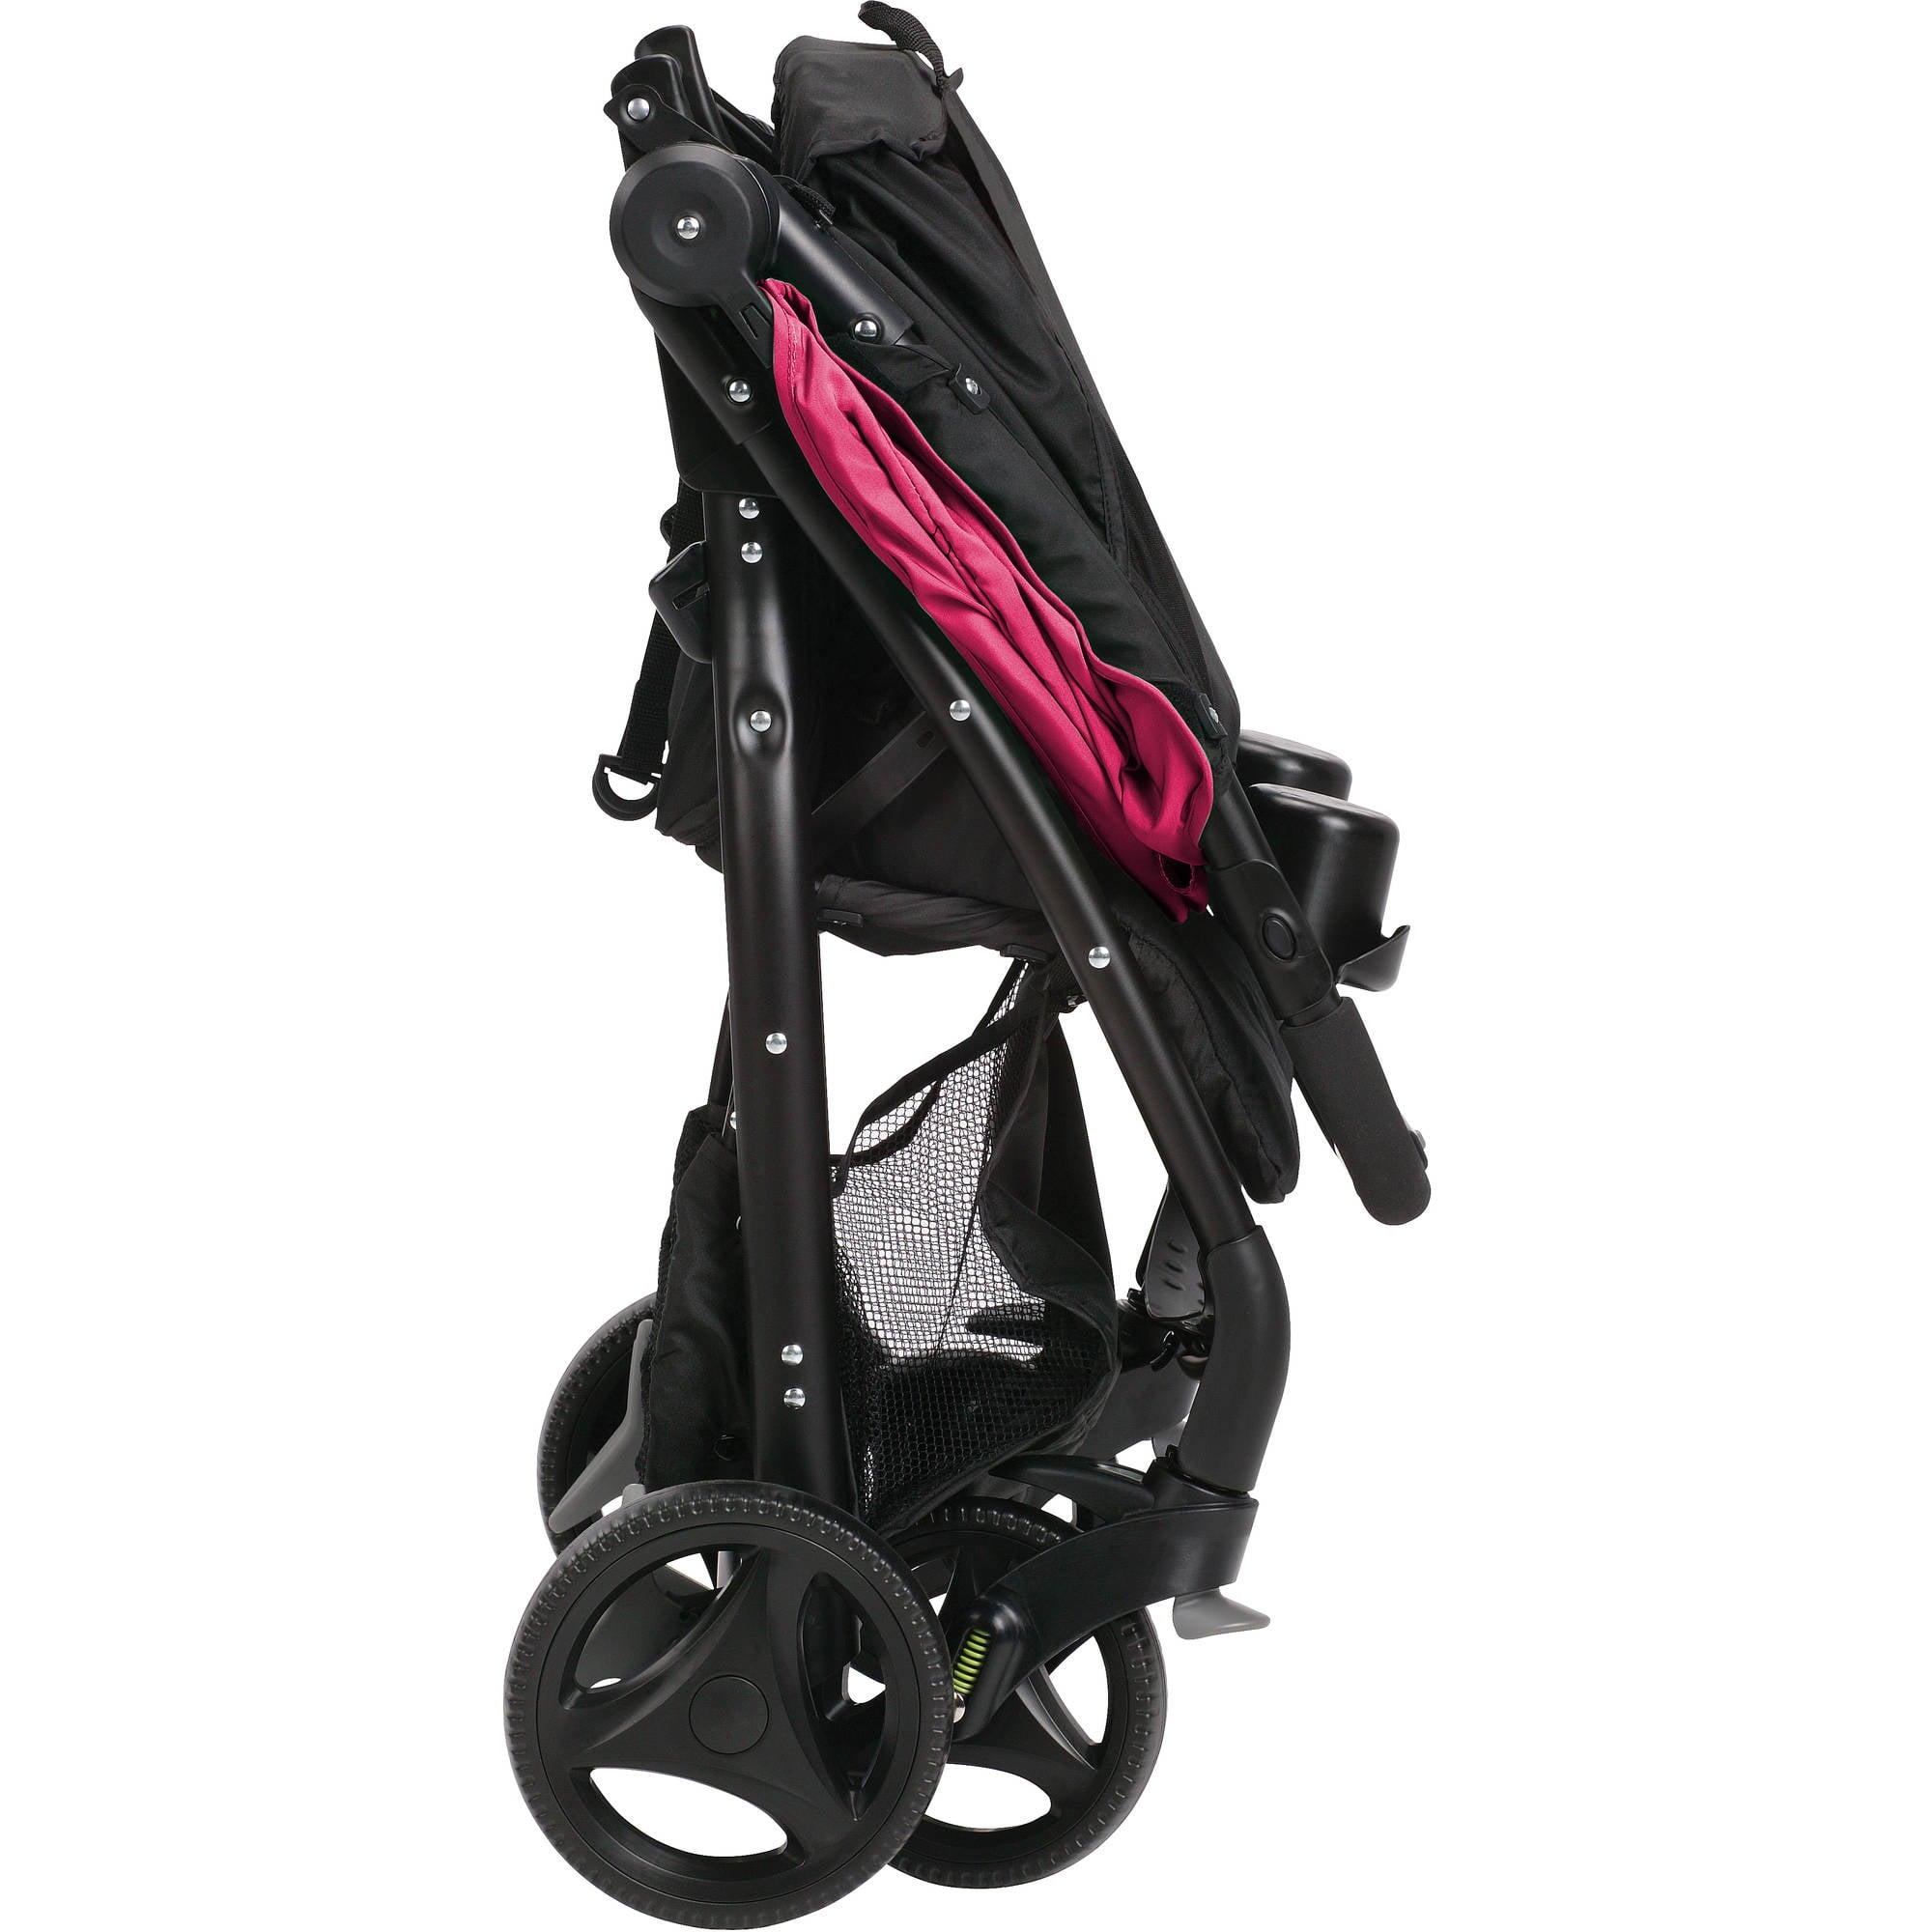 graco verb click connect travel system